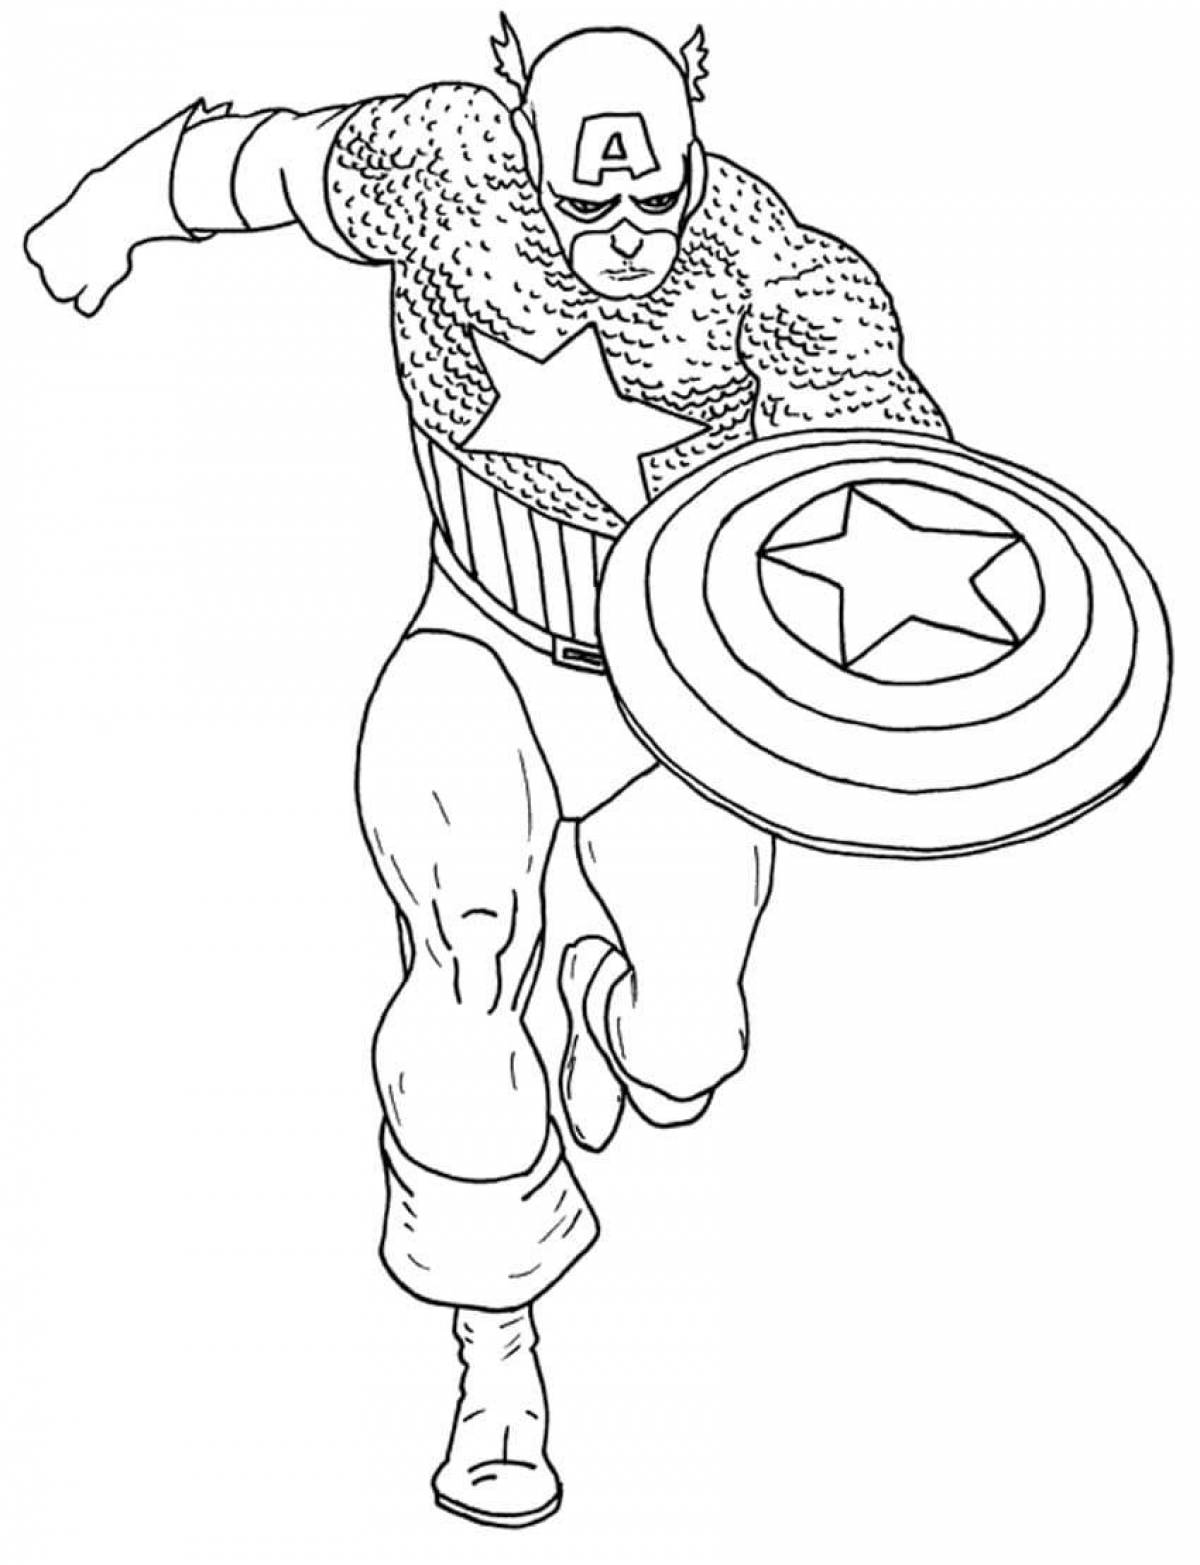 Intriguing marvel heroes coloring book